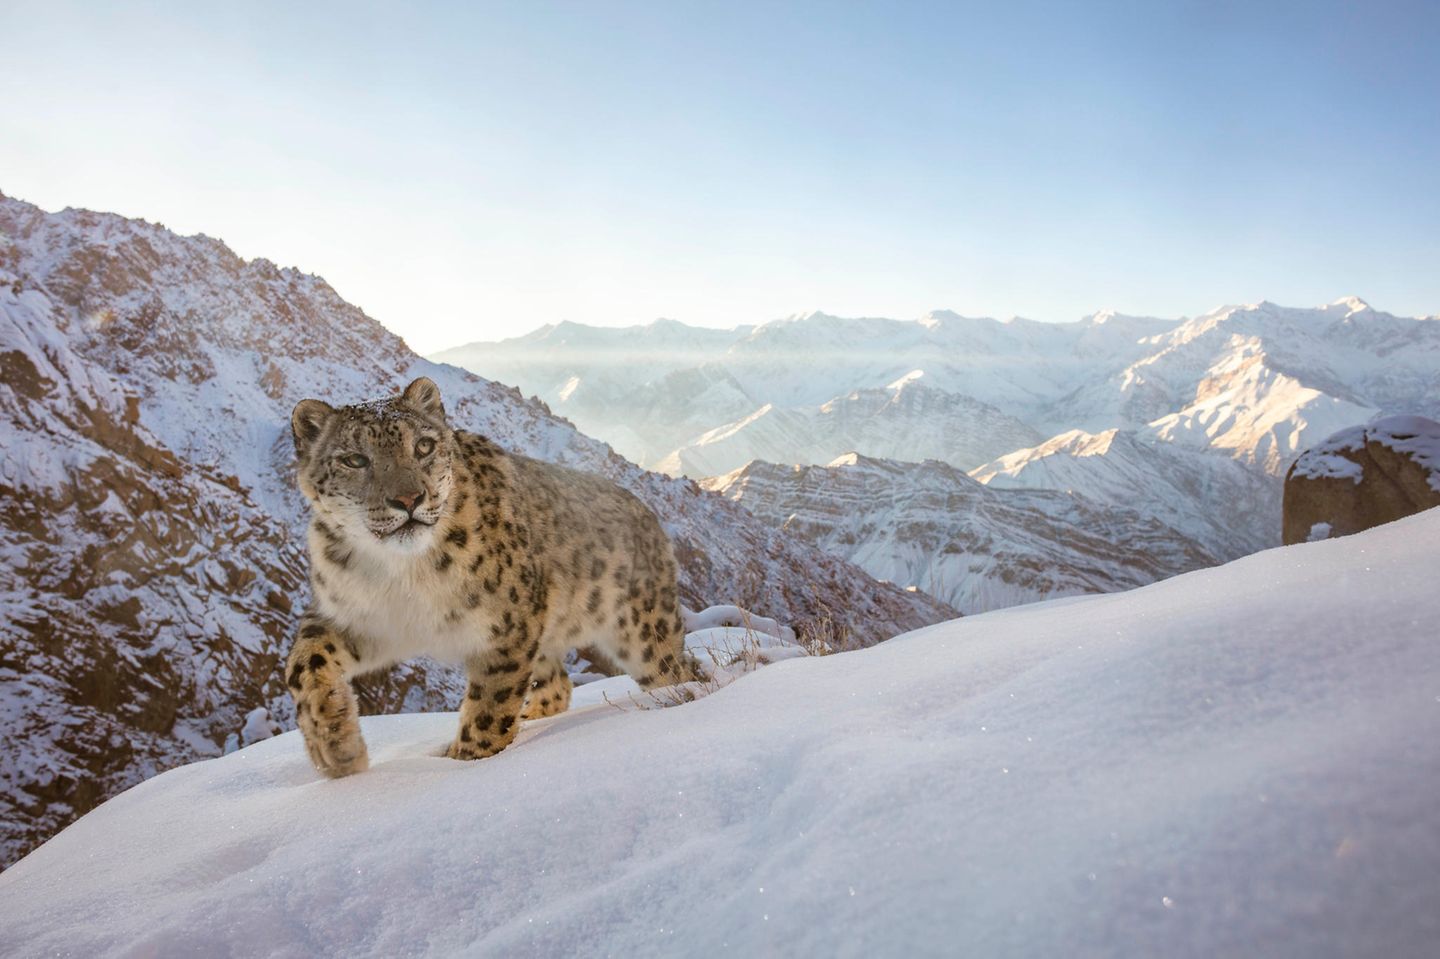 GOLD: SASCHA FONSECA, UNITED ARAB EMIRATES  A beautiful snow leopard triggers my camera trap high up in the Indian Himalayas. I captured this image during a 3-year DSLR camera trap project in the Ladakh region in northern India. The mystery surrounding the snow leopard always fascinated me. They are some of the most difficult large cats to photograph in the wild. Not only because of their incredible stealth, but also because of the remote environment they live in.